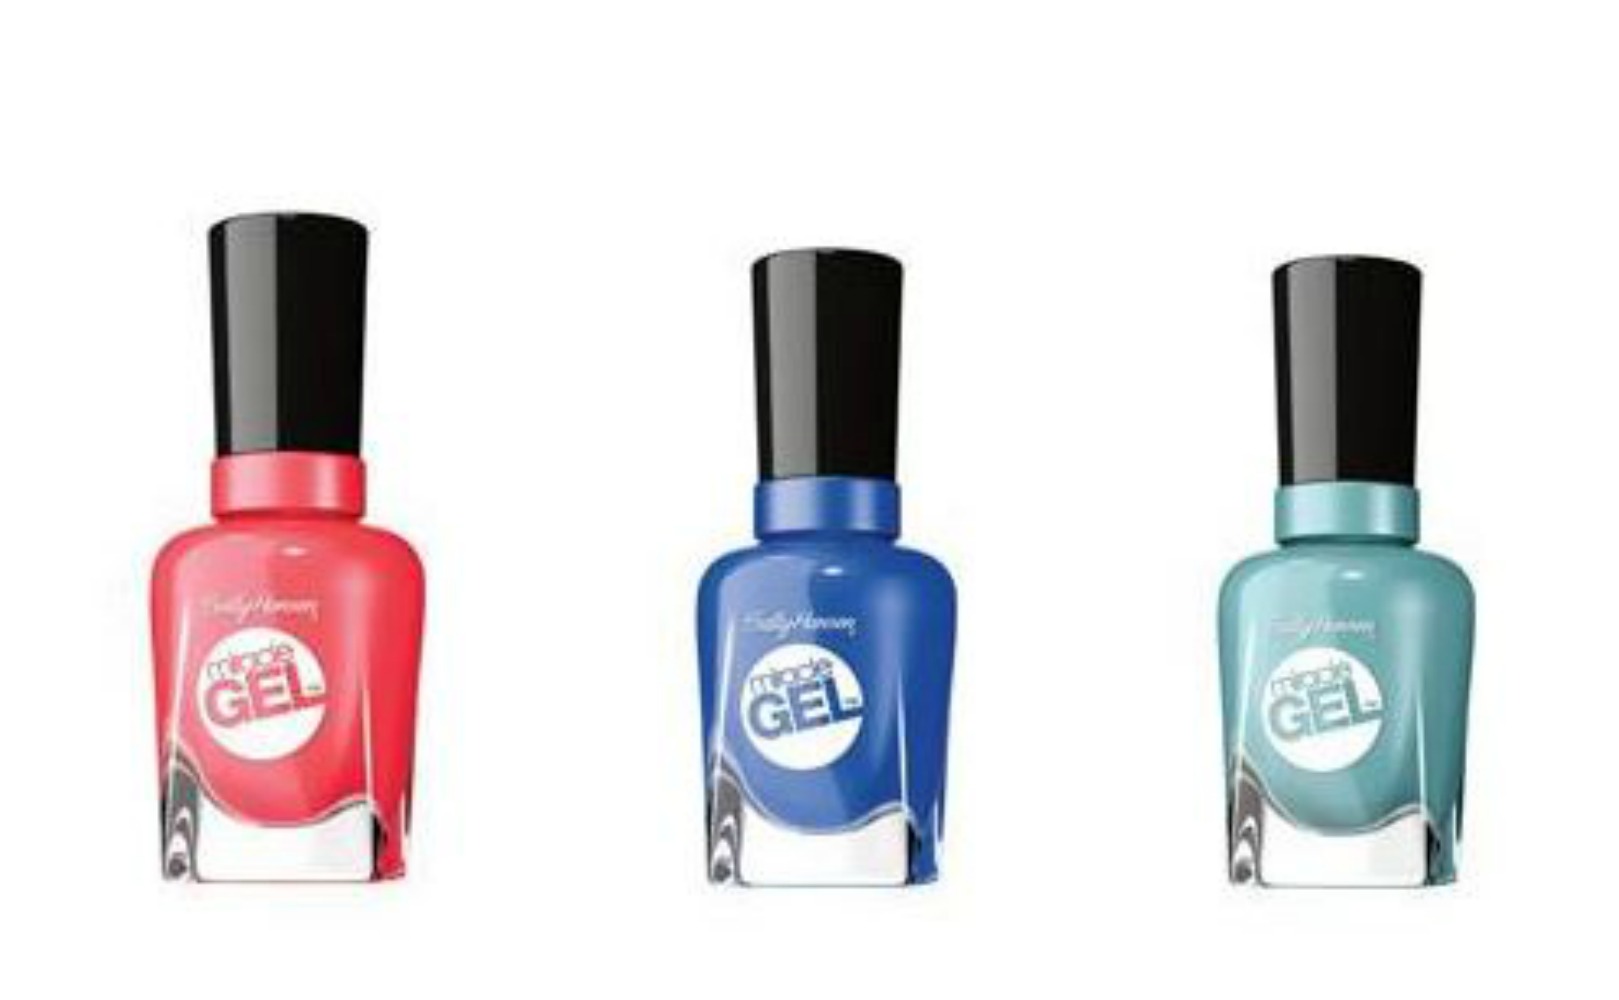 Sally Hansen Miracle Gel Products Only $3.33 Each at Target!